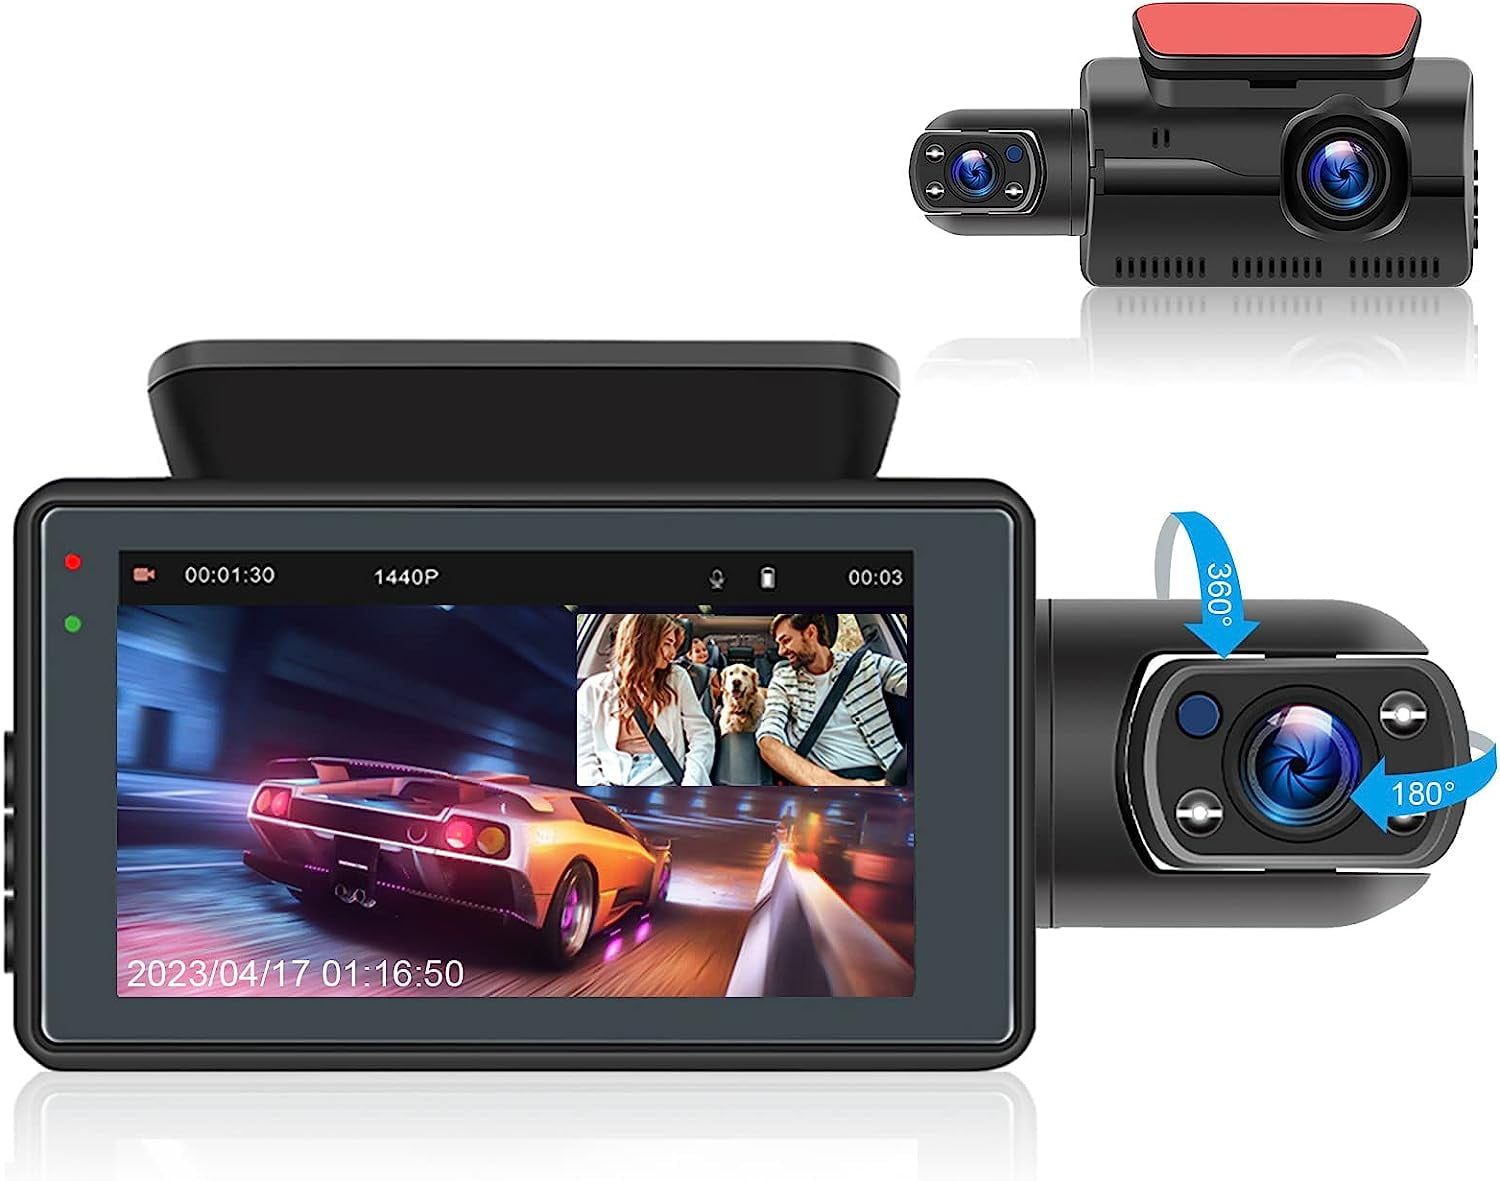 Roinvou 3 Channel Dash Cam Front Rear and Inside with 2 IPS Screen, Three  Way Triple Dash Camera Recorder for Car, 130° FOV with Night Vision